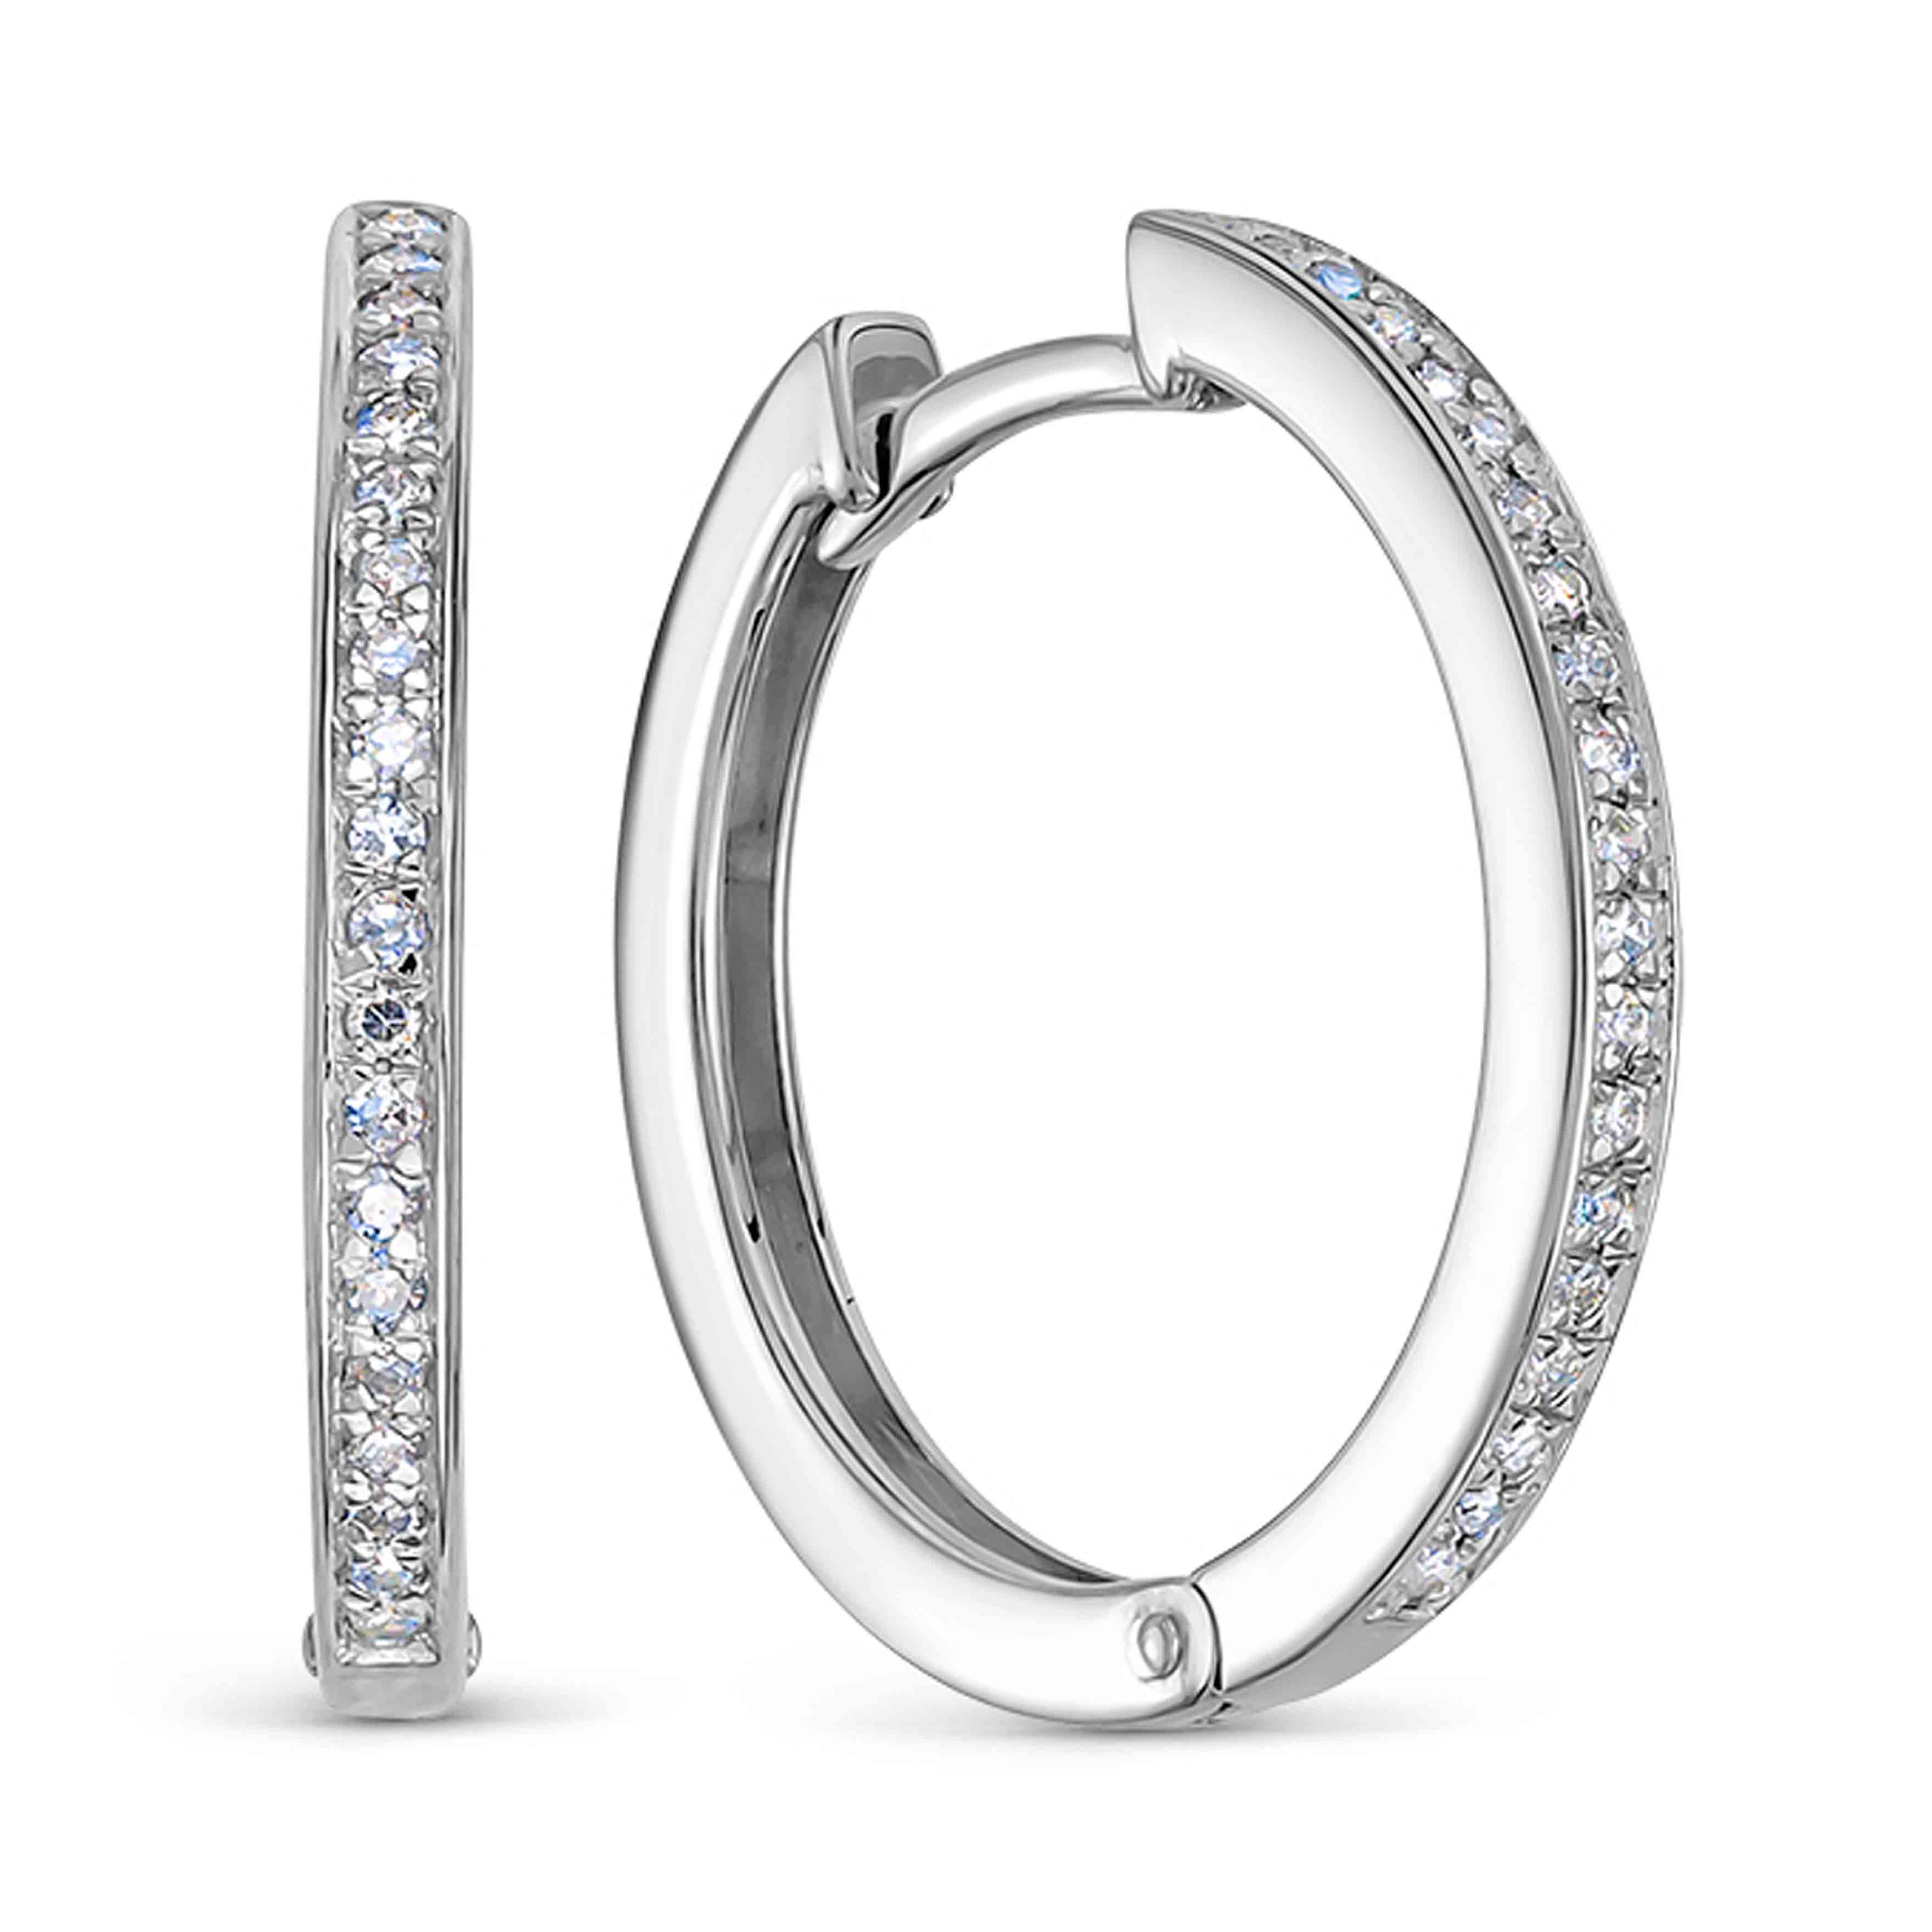 Buy Black jack 1.00 Ct. Diamond Inside Out Eternity Hoop Earrings  Moissanite Stud Earring In 14K White Gold Plated On 925 Sterling Silver  With Certificate of Authenticity 925 Stamped at Amazon.in